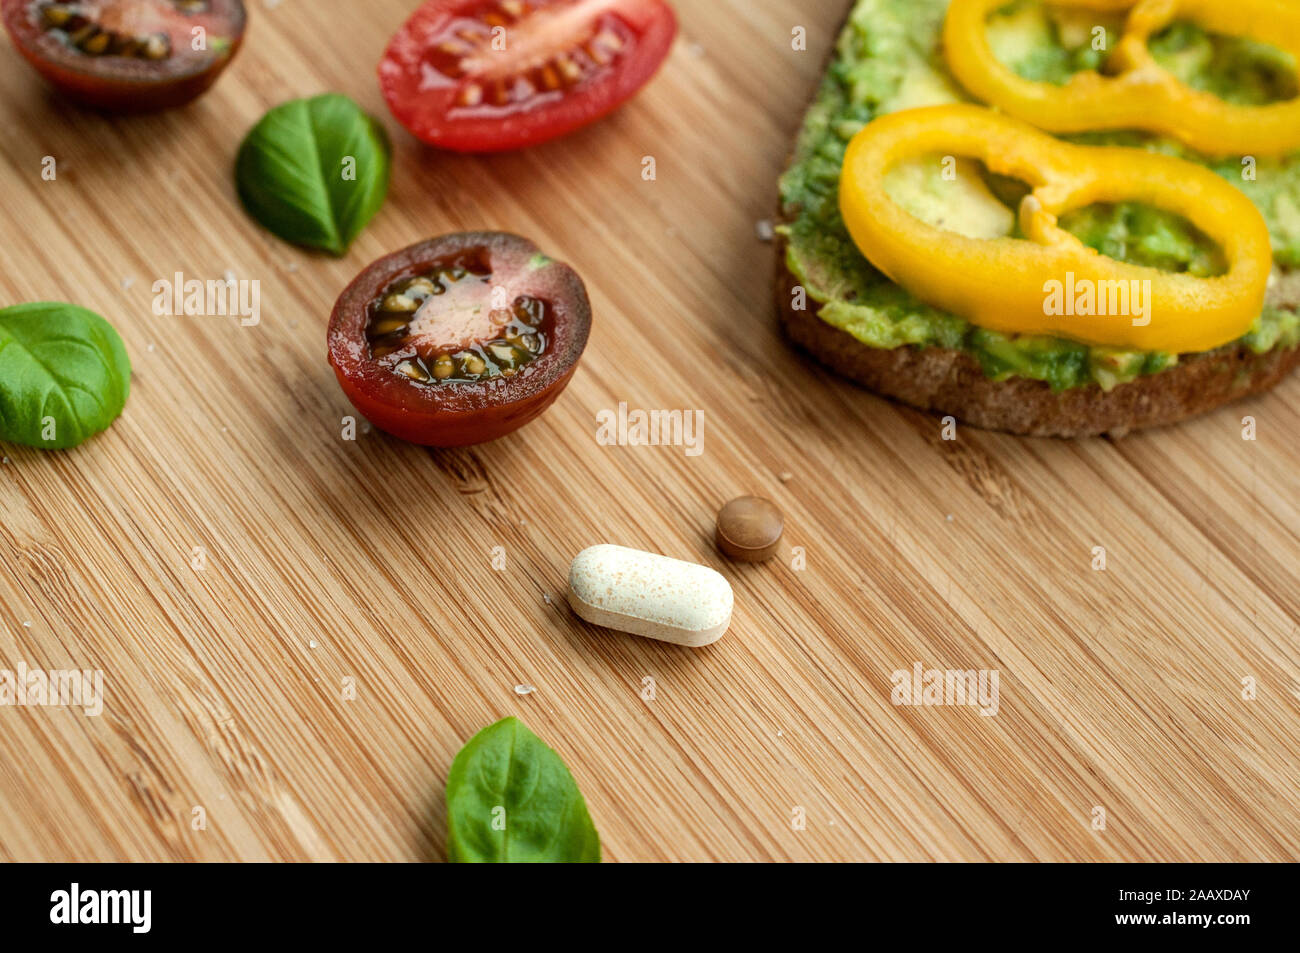 Supplements as part of a natural and balanced diet. Pills and food served together. Future of nutrition. Stock Photo